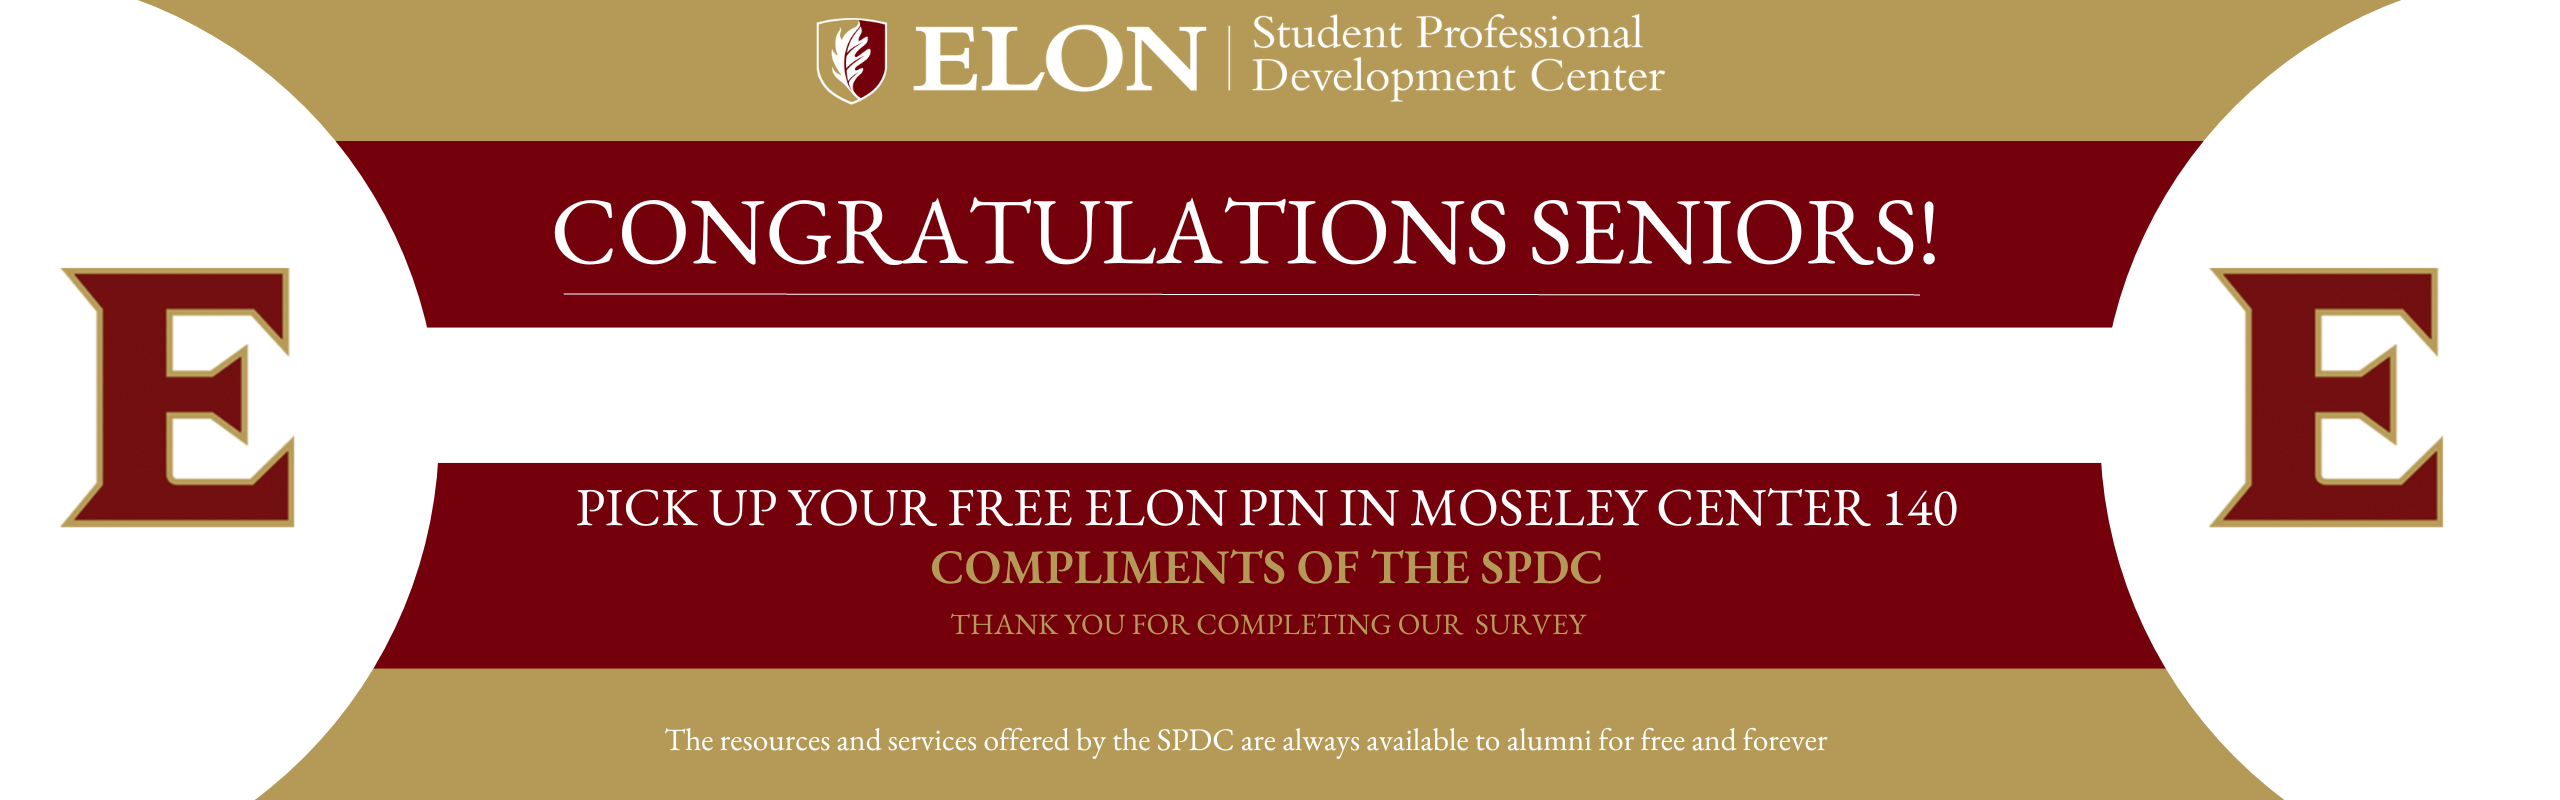 free elon pins for seniors in moseley center 140